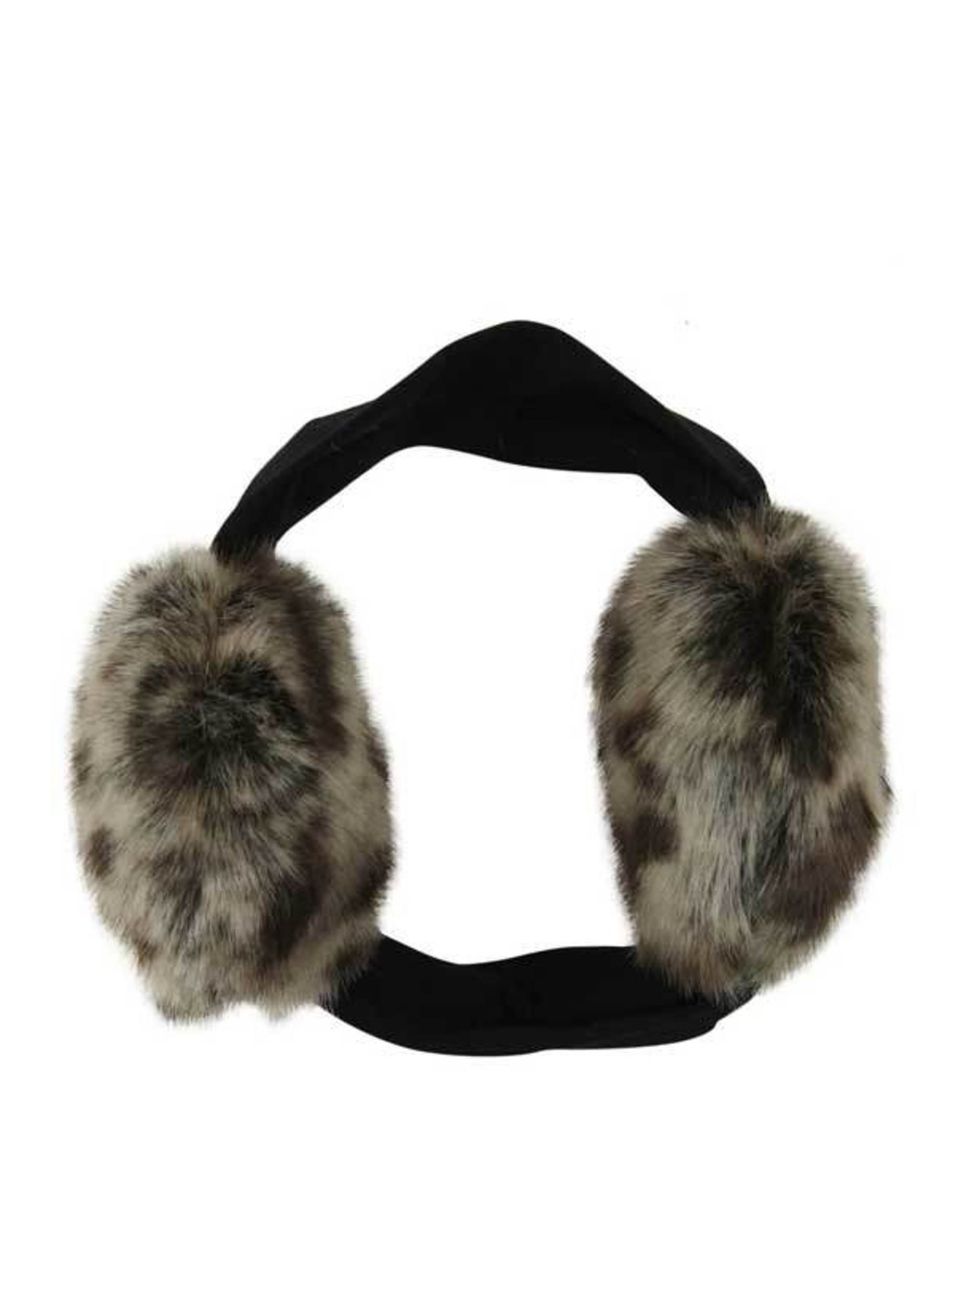 <p>Blanche in the Brambles animal print earmuffs, £40, at <a href="http://www.liberty.co.uk/fcp/product/Liberty/Blanche-in-the-Brambles/Animal-Print-Brown-Faux-Fur-Earmuffs,-Blanche-In-The-Brambles/57127">Liberty</a></p>